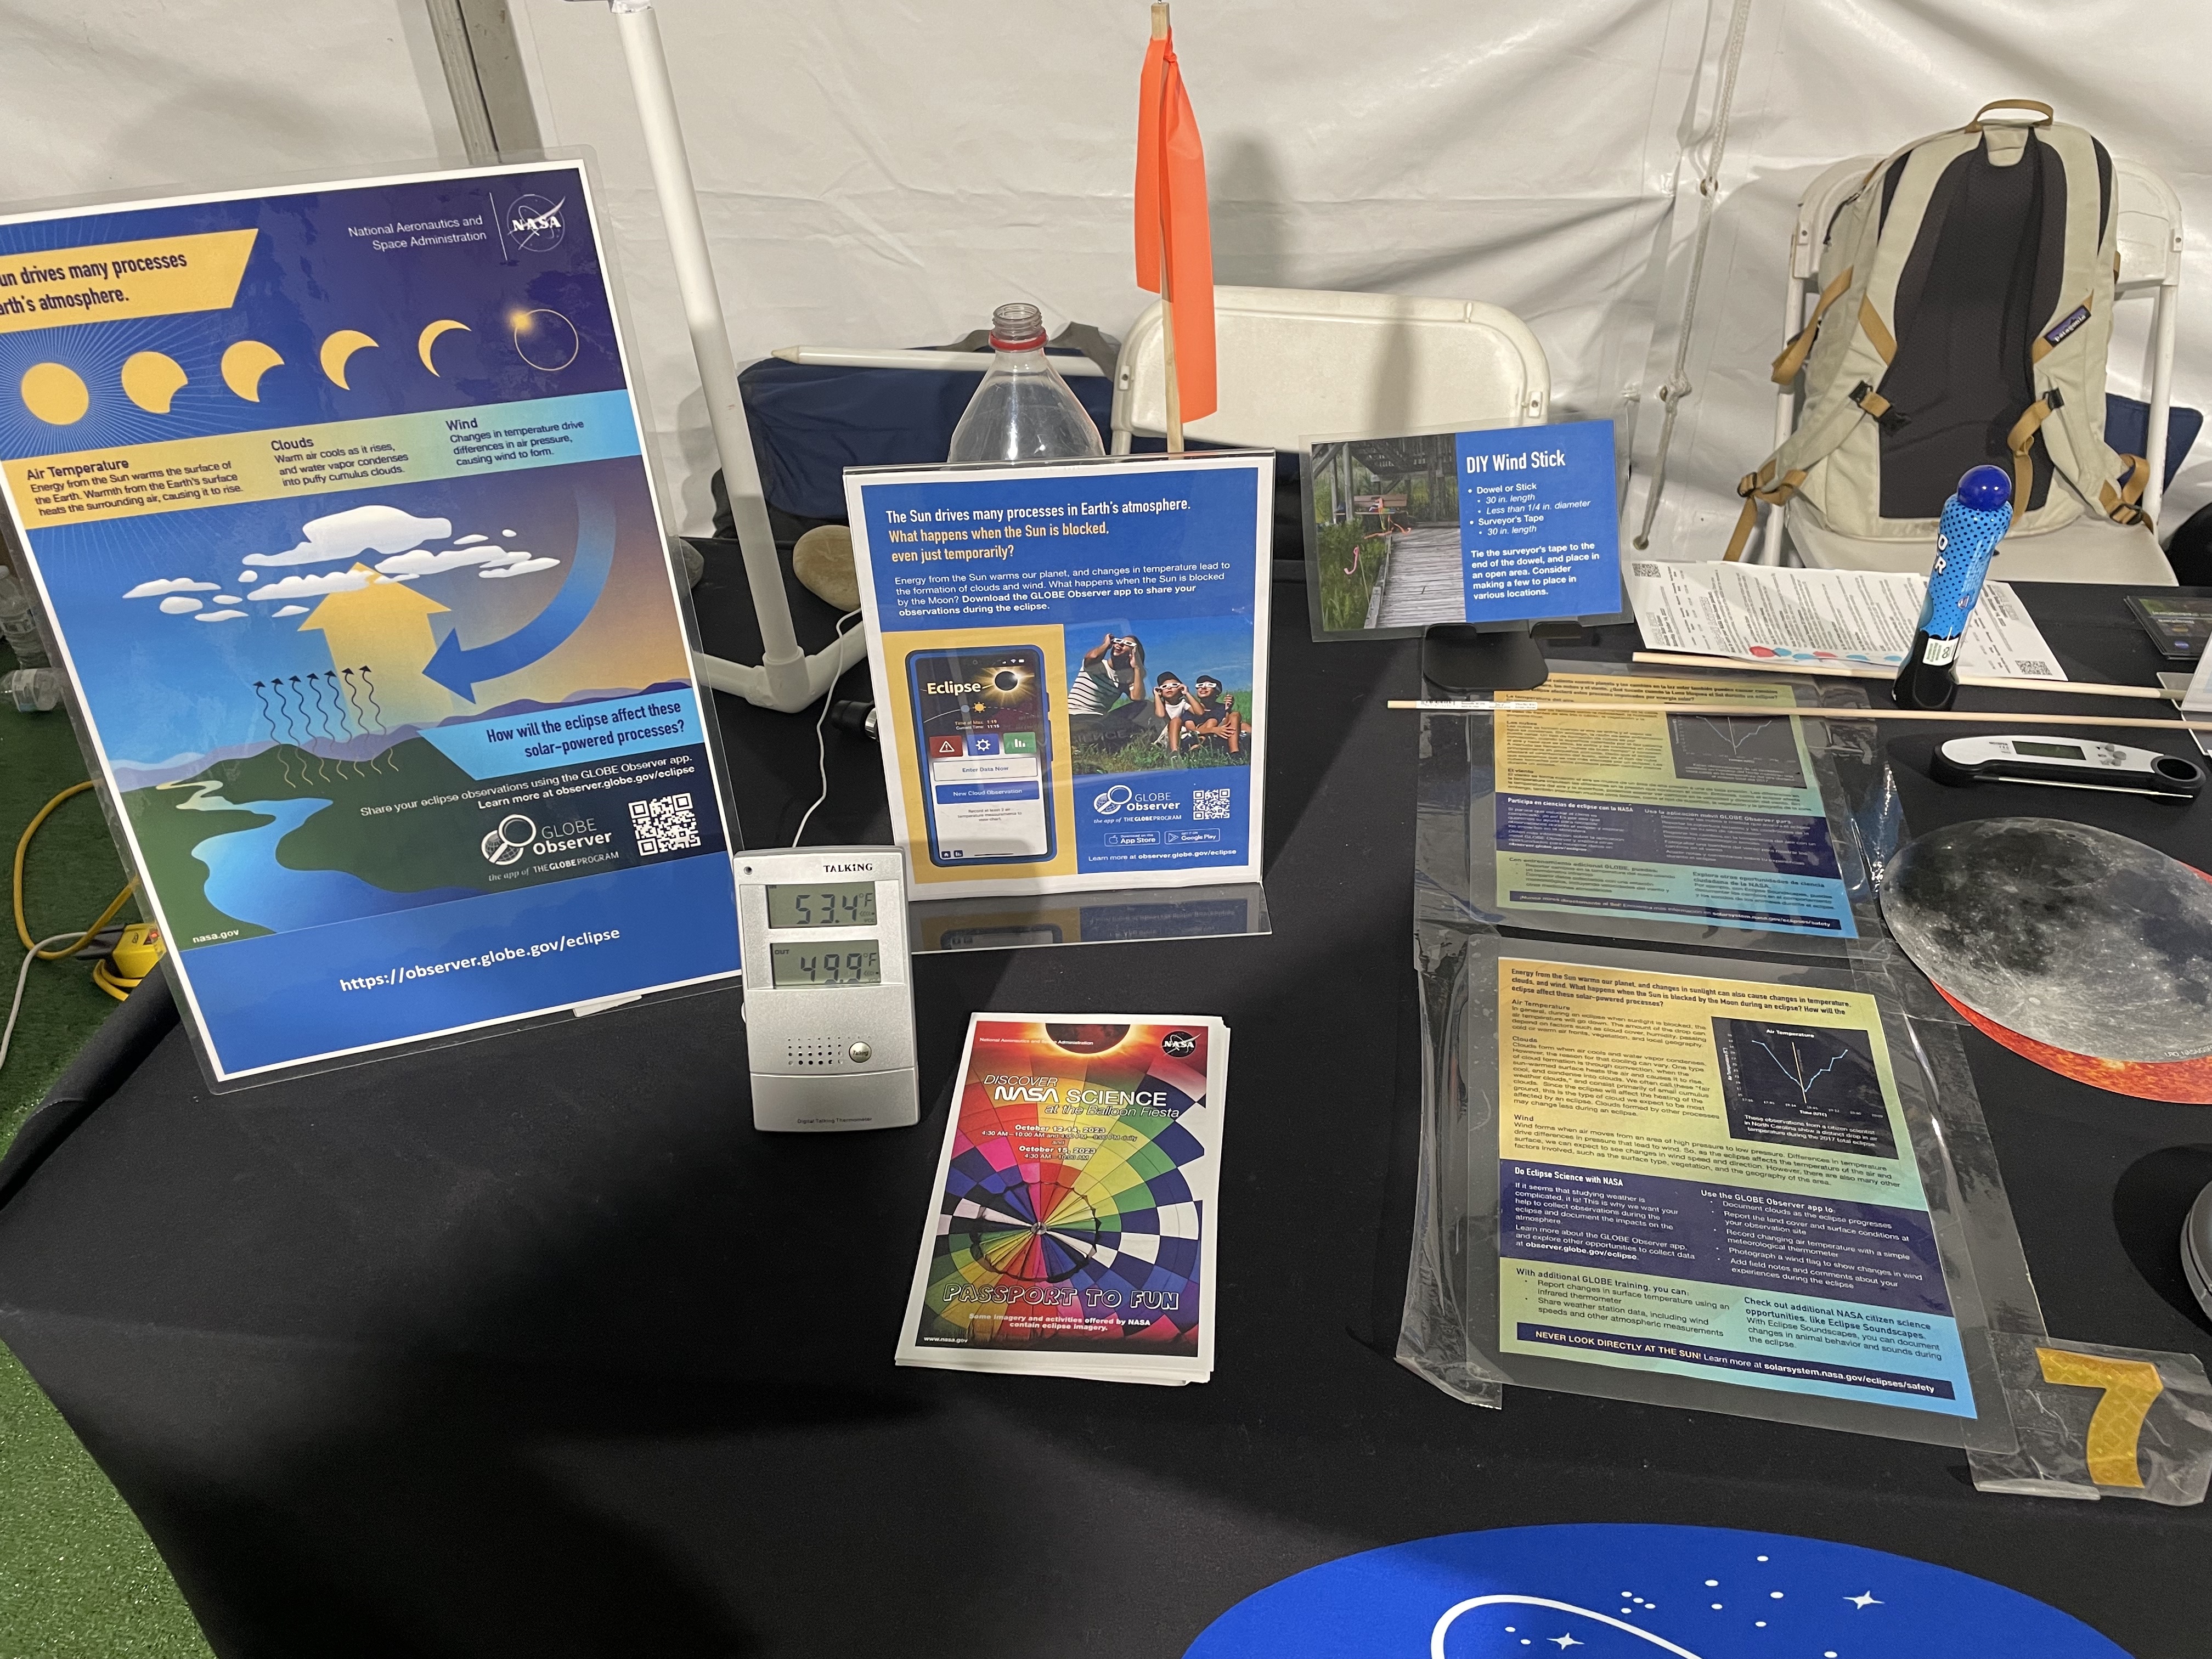 A tabletop display showing the GLOBE Eclipse atmosphere one-pager and GLOBE tabletop signs, a thermometer, solar viewing glasses, and a Sun and Earth cut out.